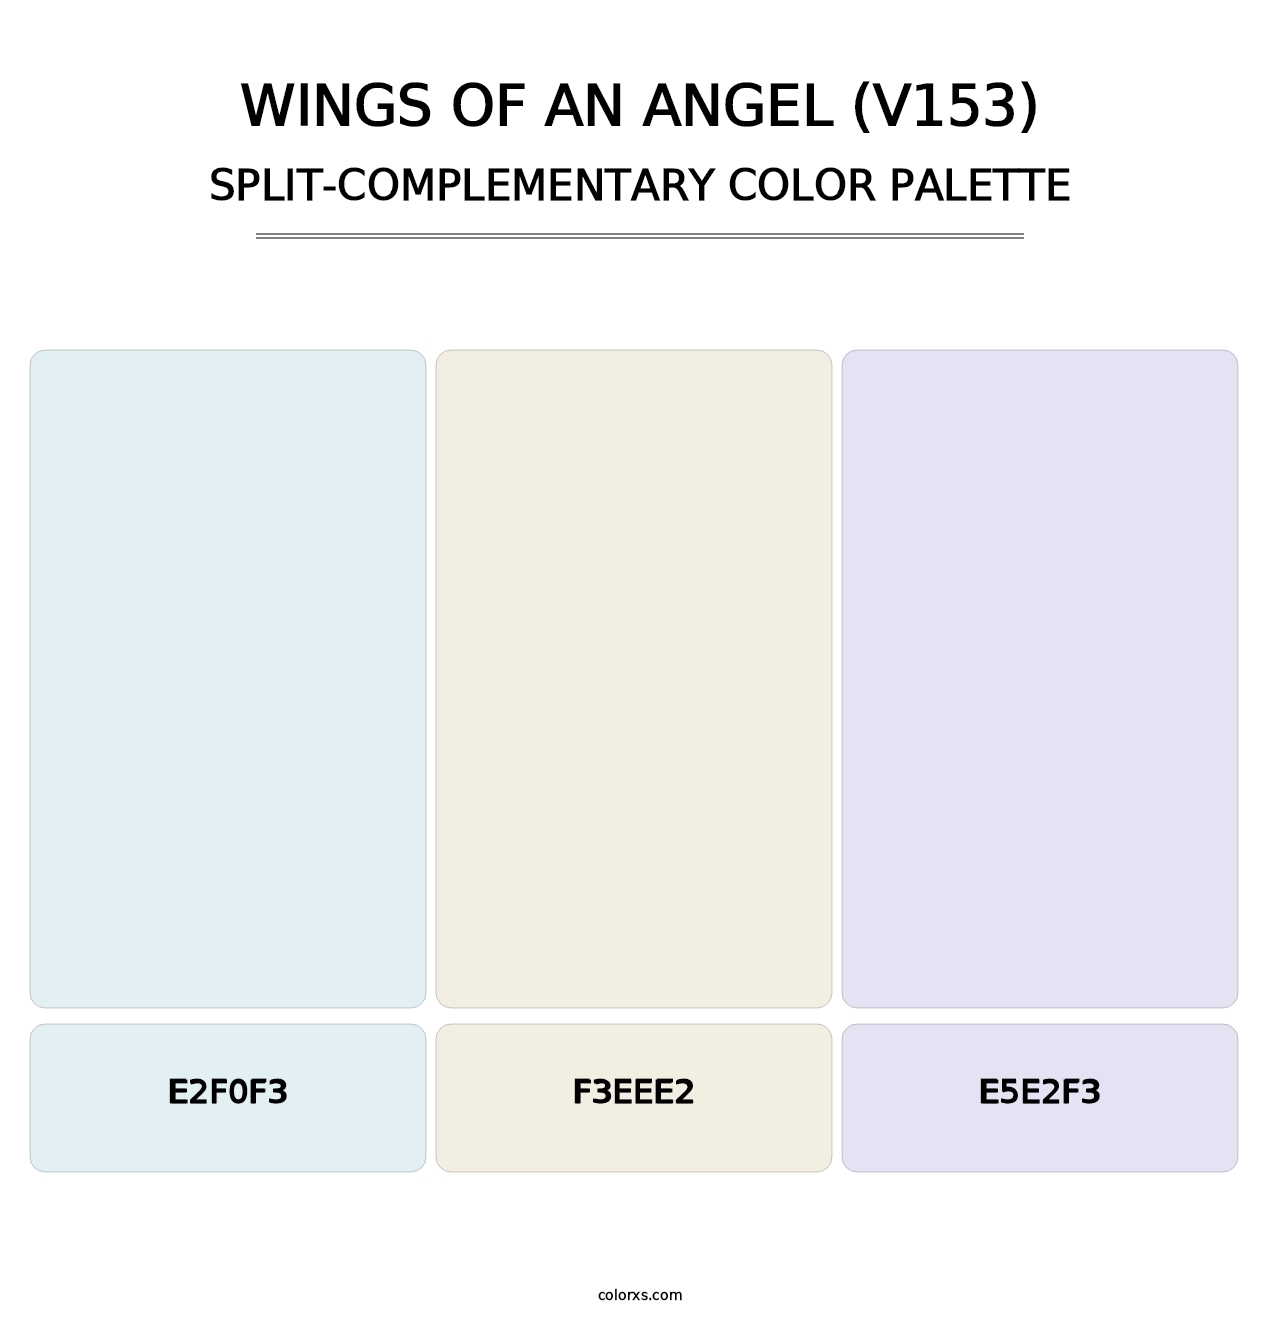 Wings of an Angel (V153) - Split-Complementary Color Palette